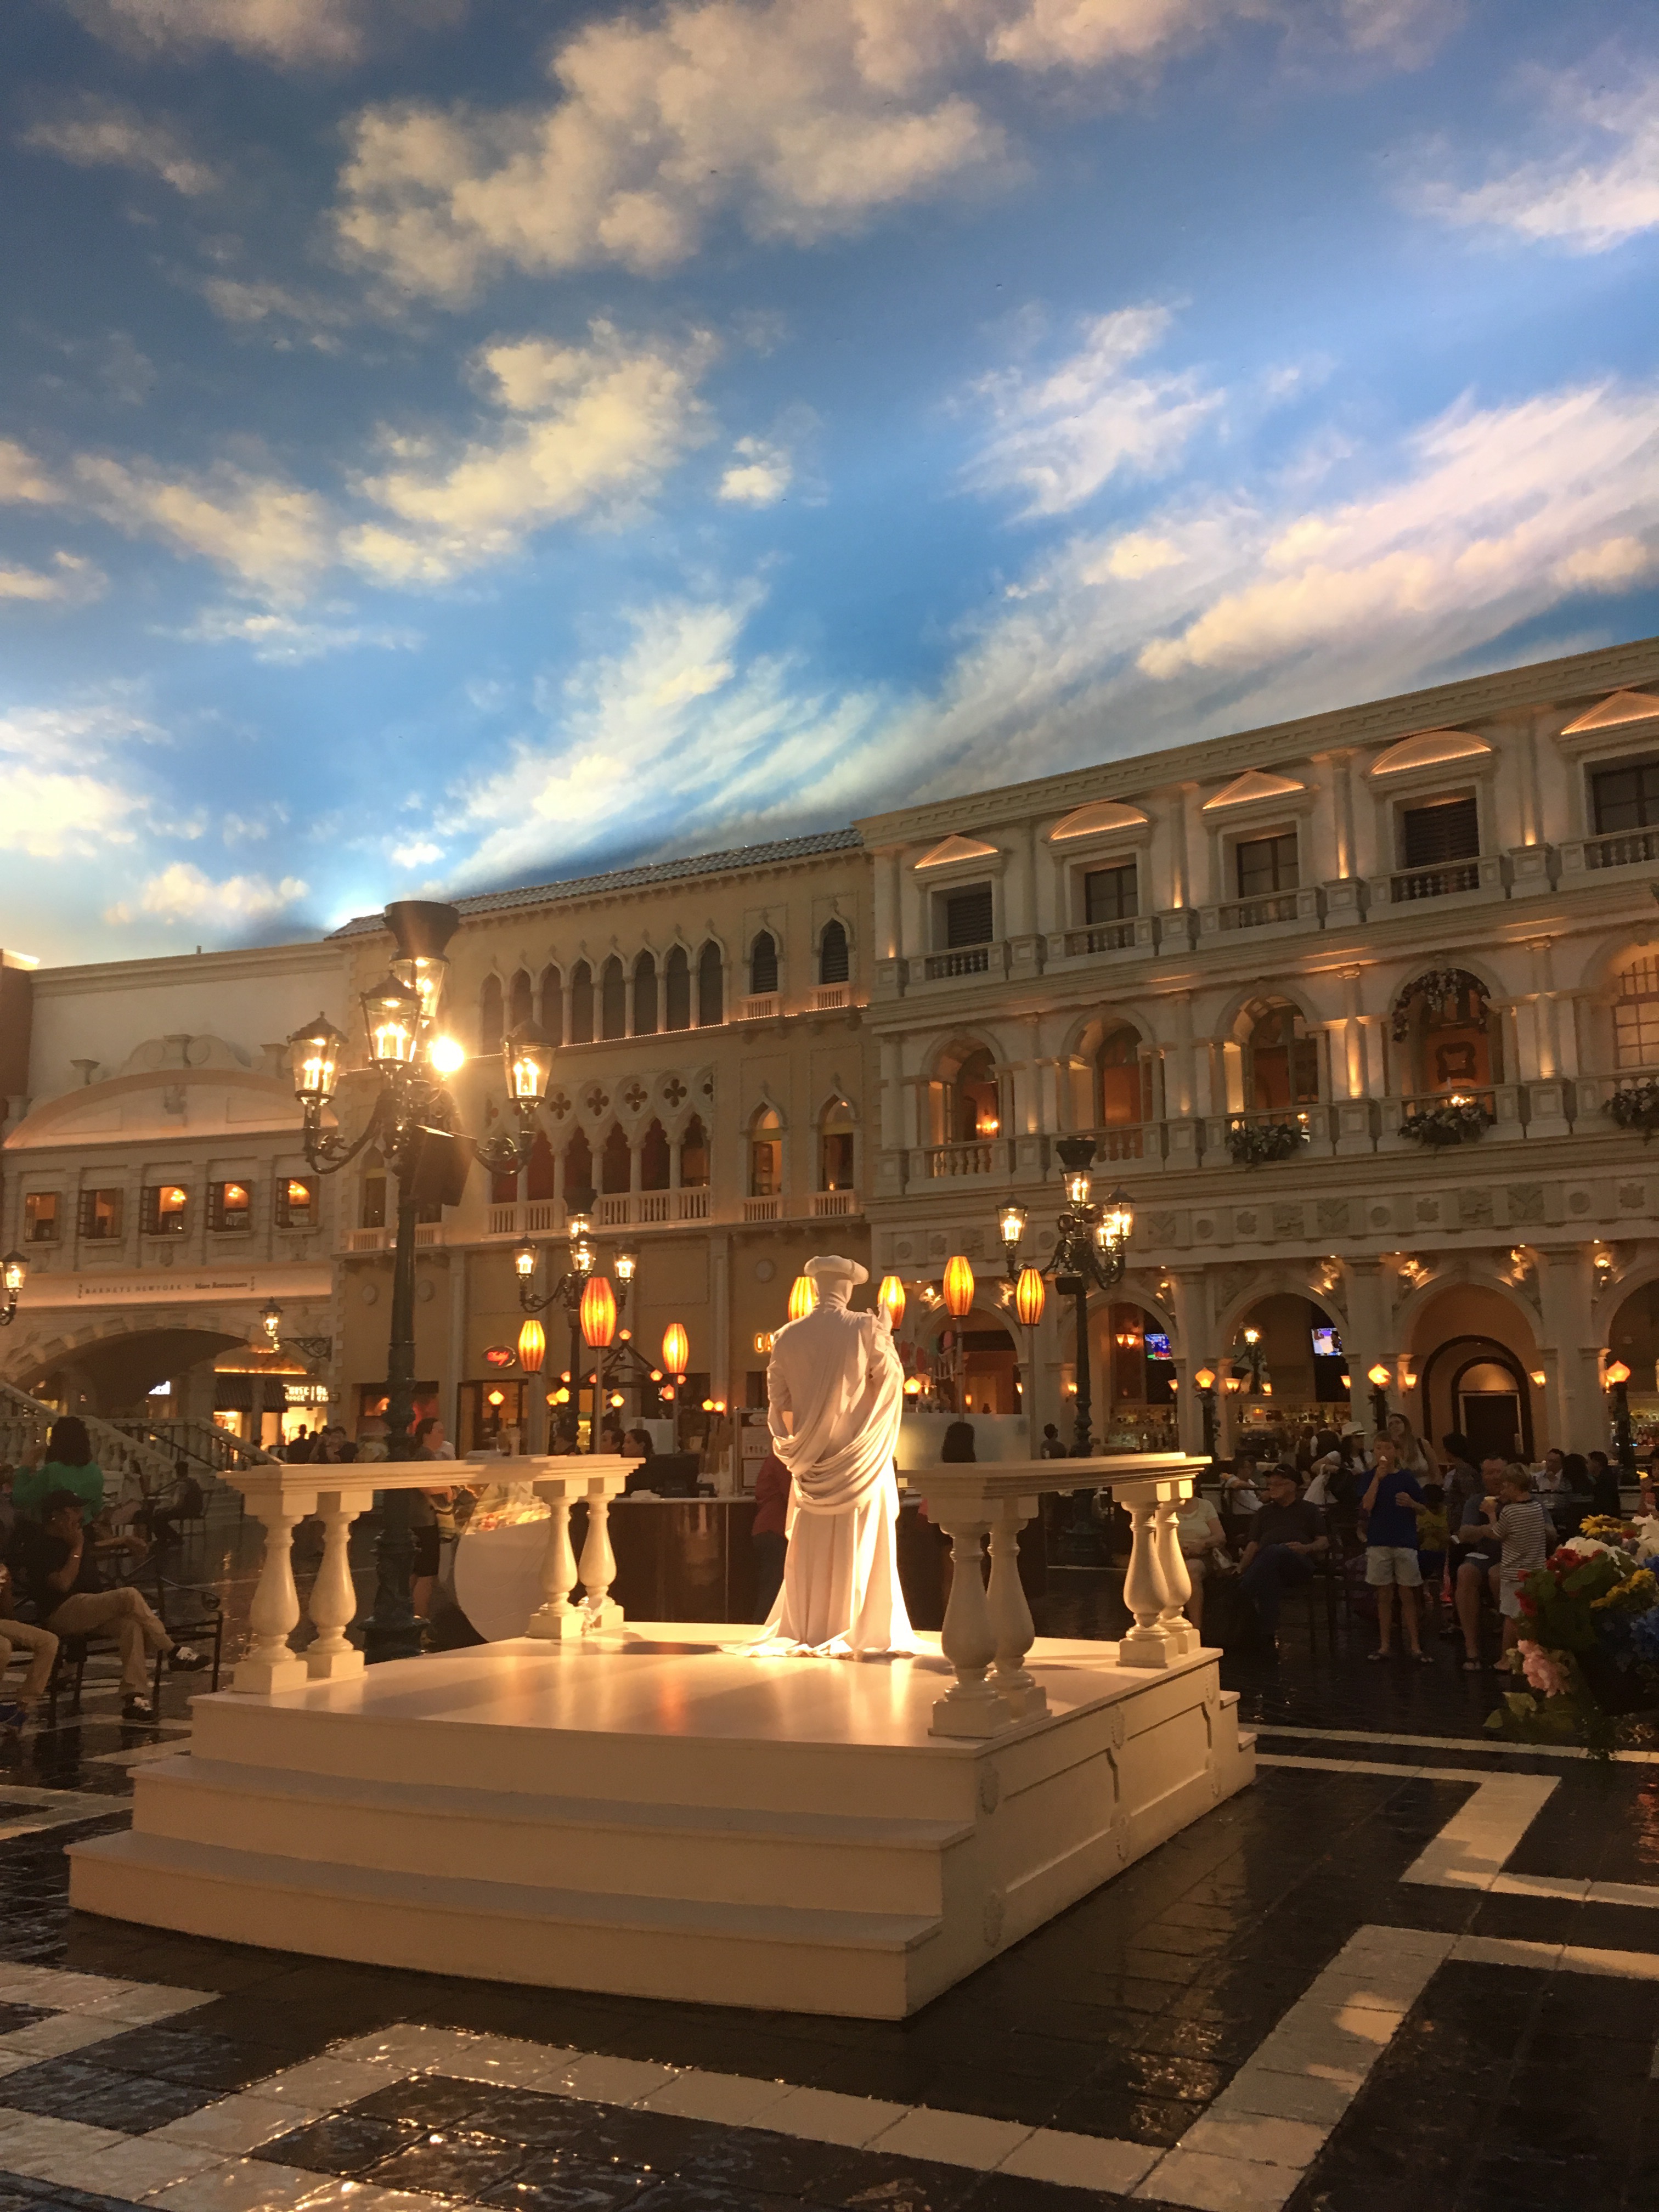 Grand Canal Shoppes at The Venetian